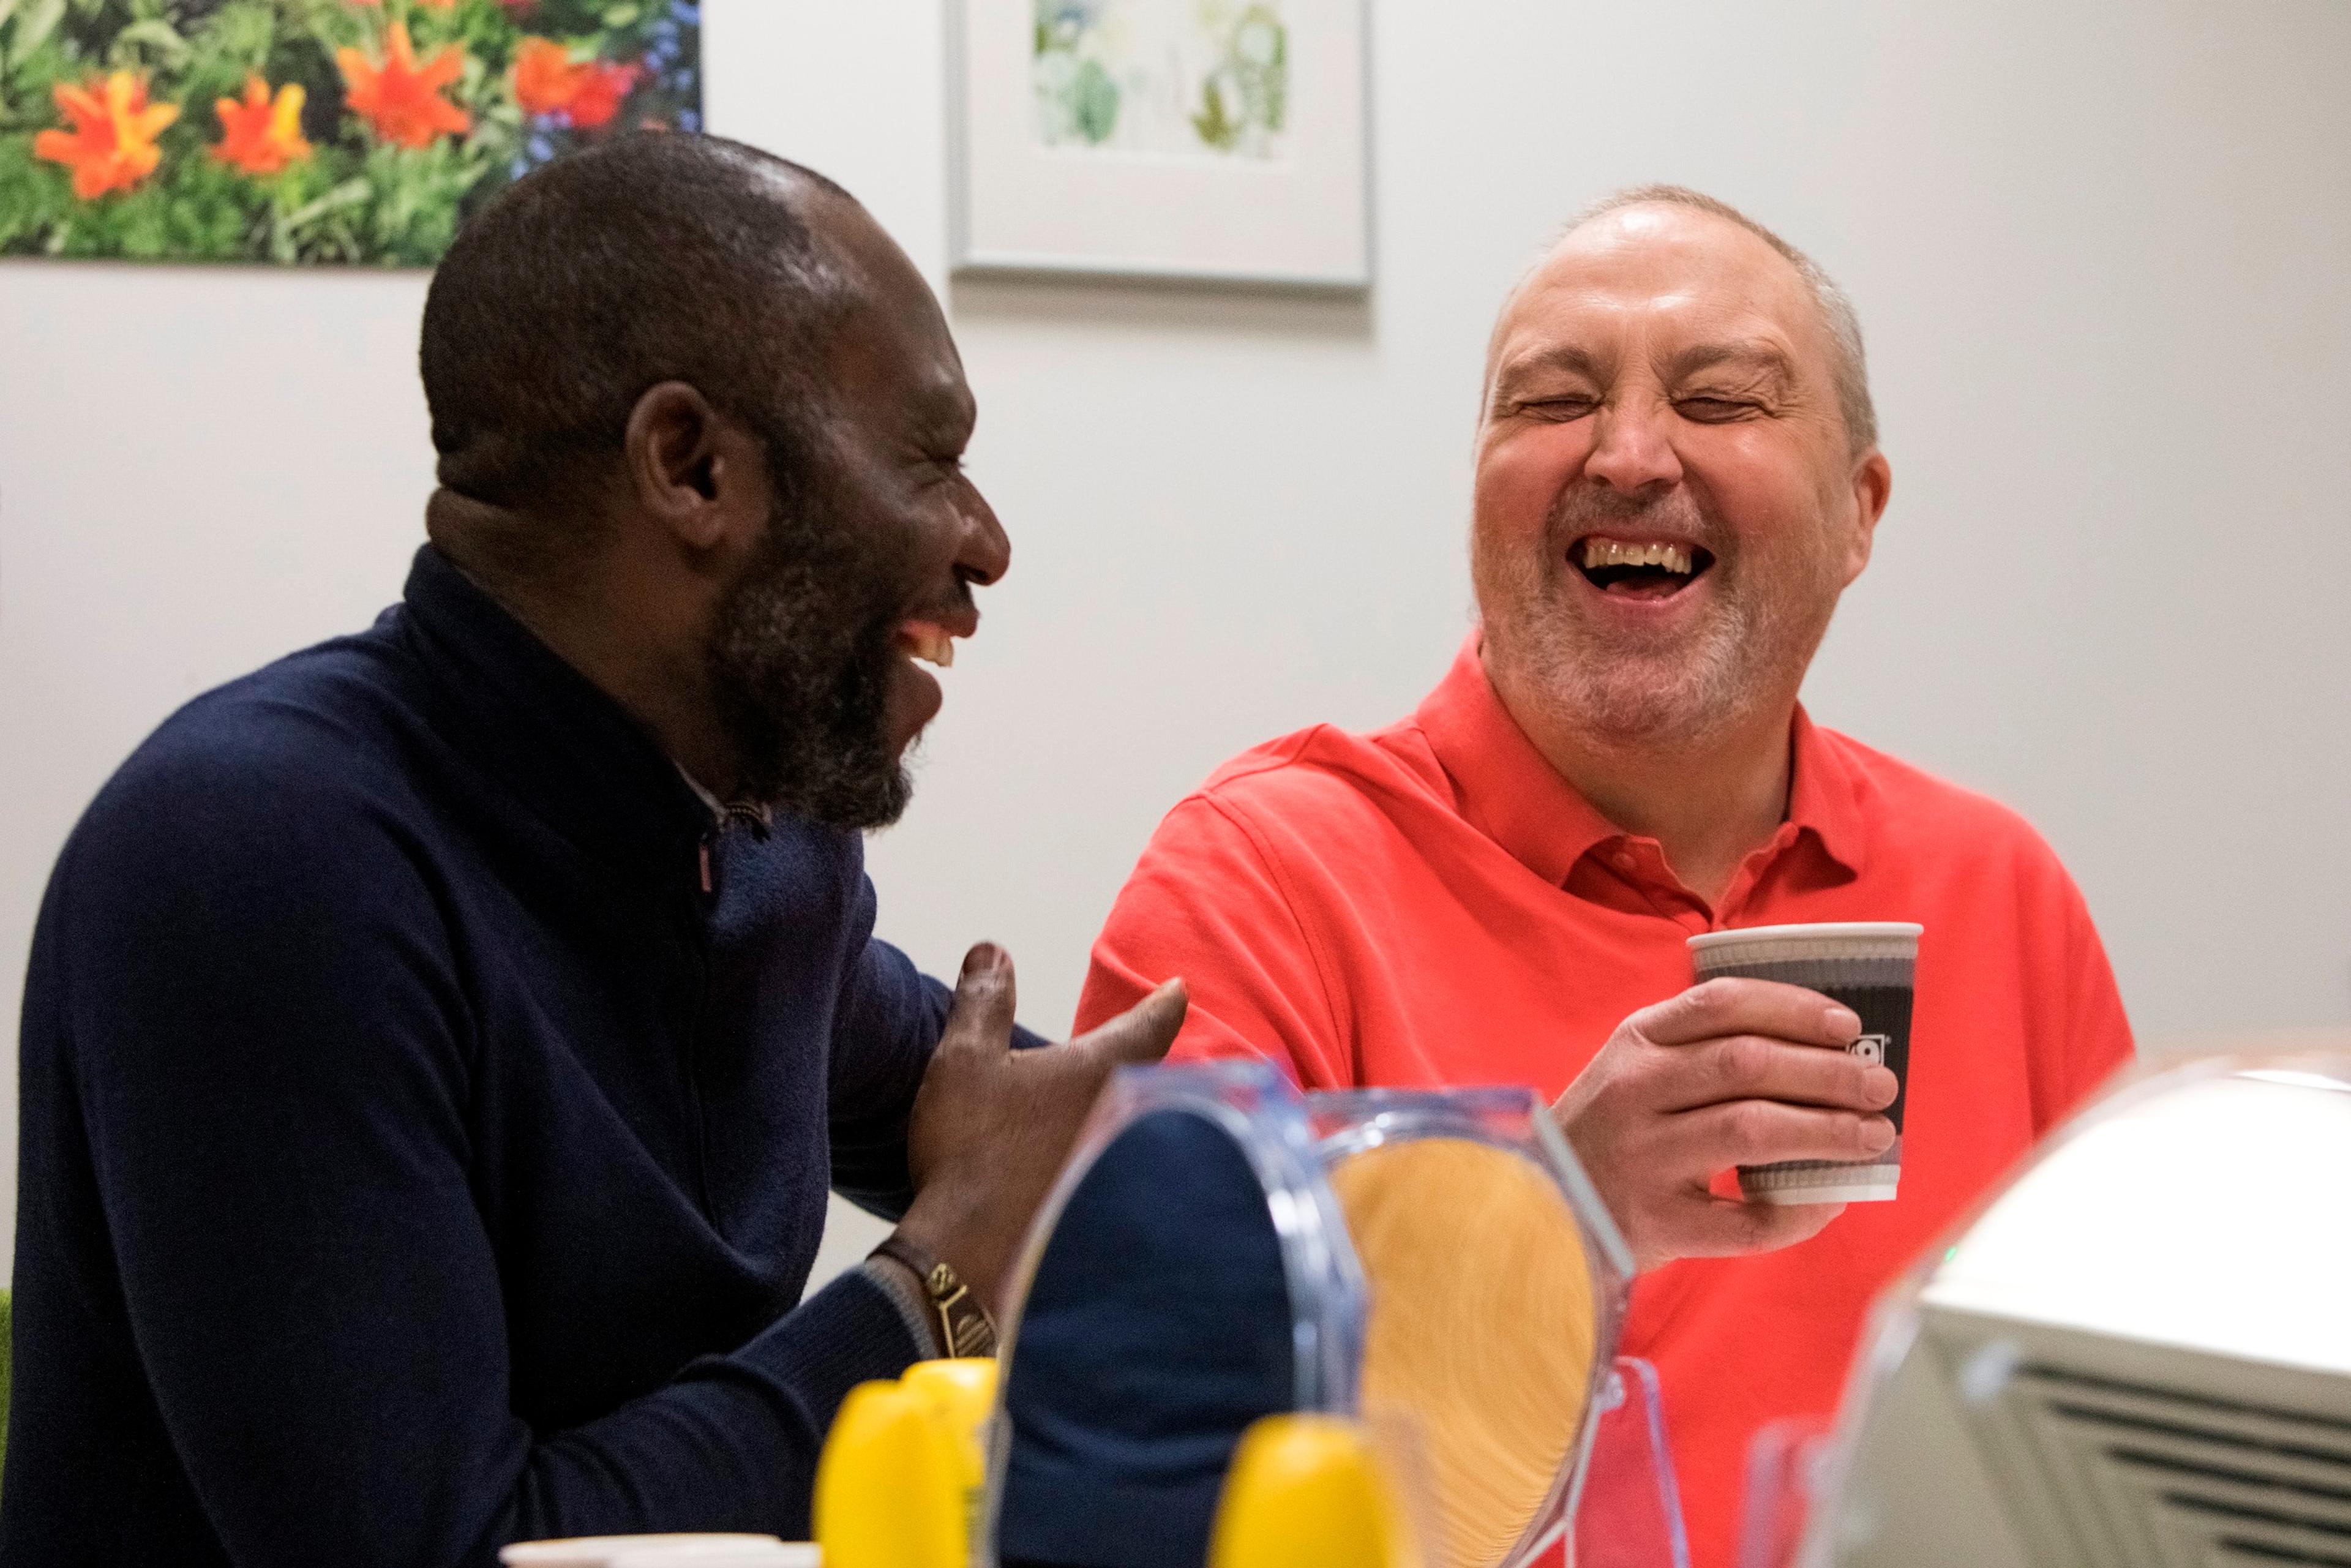 Two men having a hot drink laughing with each other